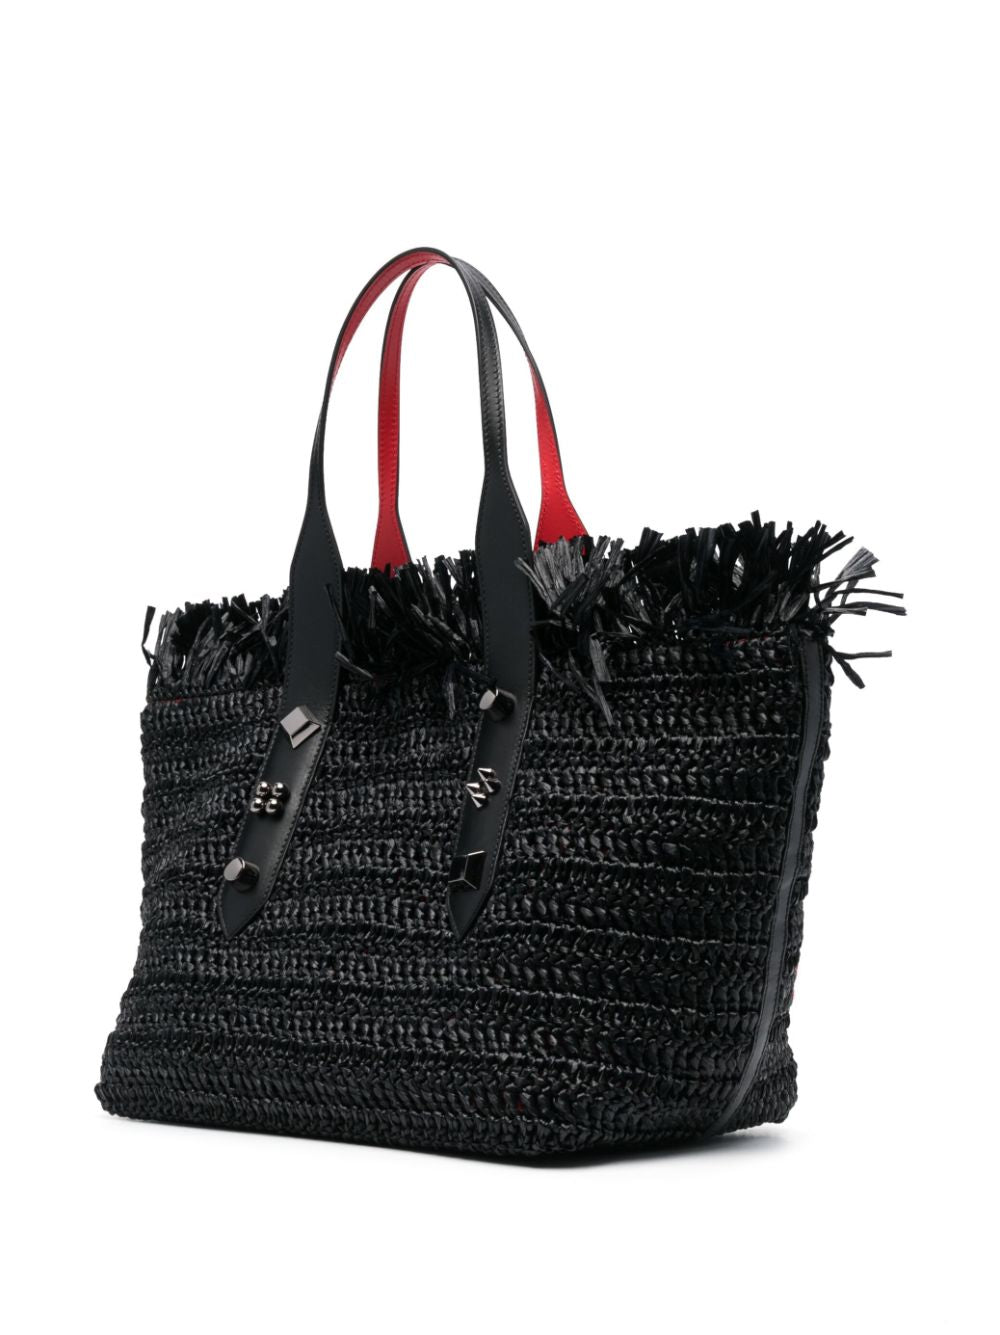 Black Raffia Tote Bag with Frayed Detail and Silver Studs by Christian Louboutin